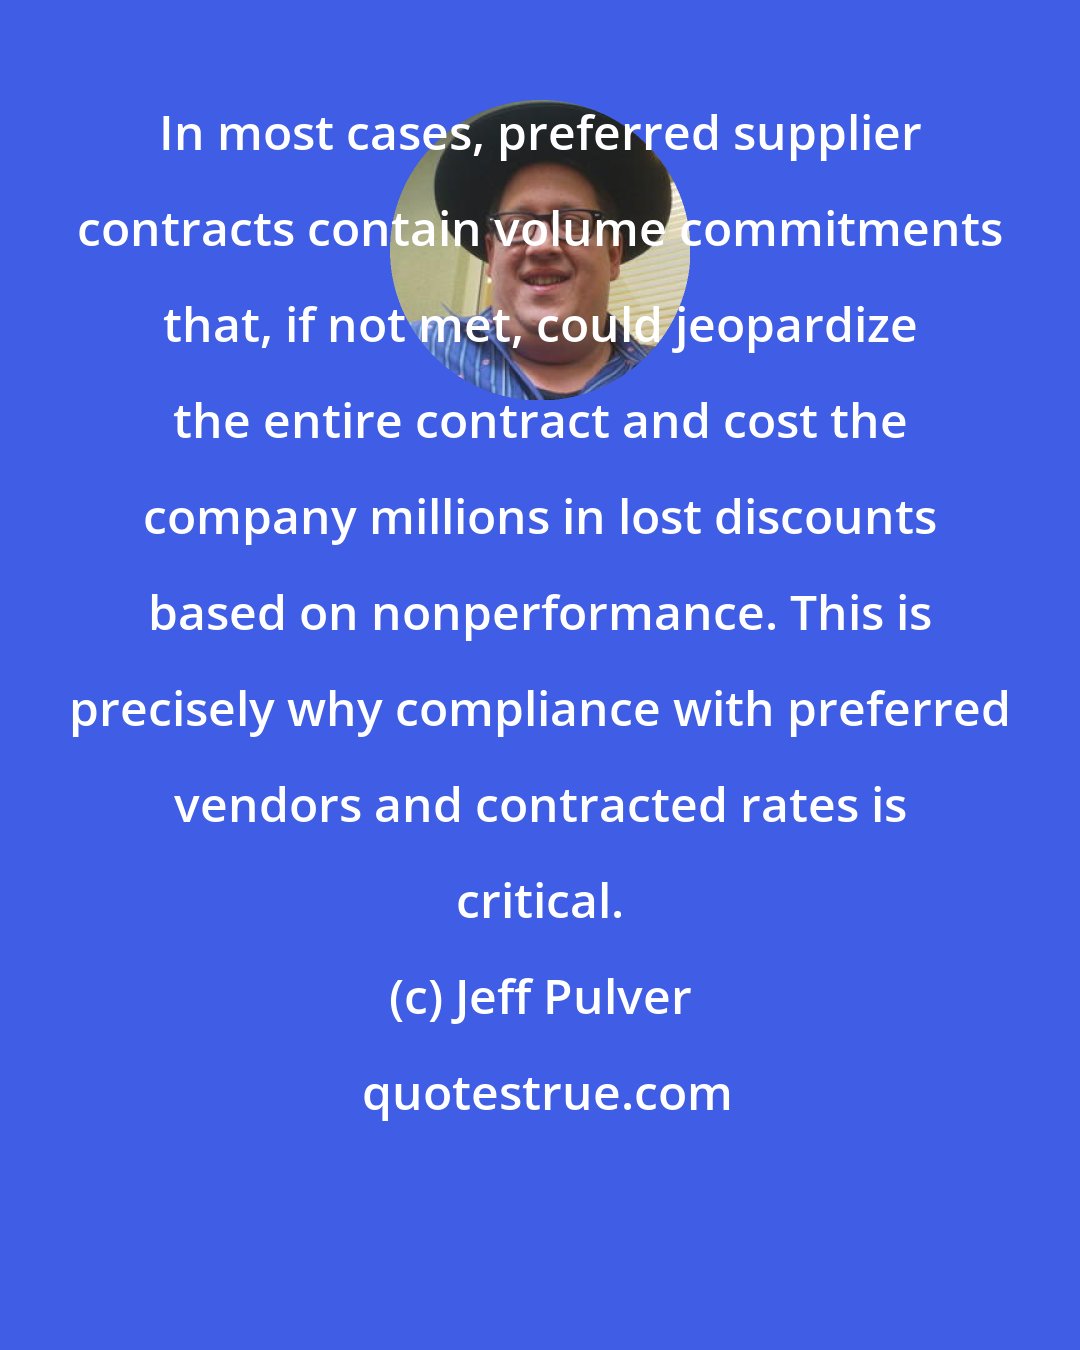 Jeff Pulver: In most cases, preferred supplier contracts contain volume commitments that, if not met, could jeopardize the entire contract and cost the company millions in lost discounts based on nonperformance. This is precisely why compliance with preferred vendors and contracted rates is critical.